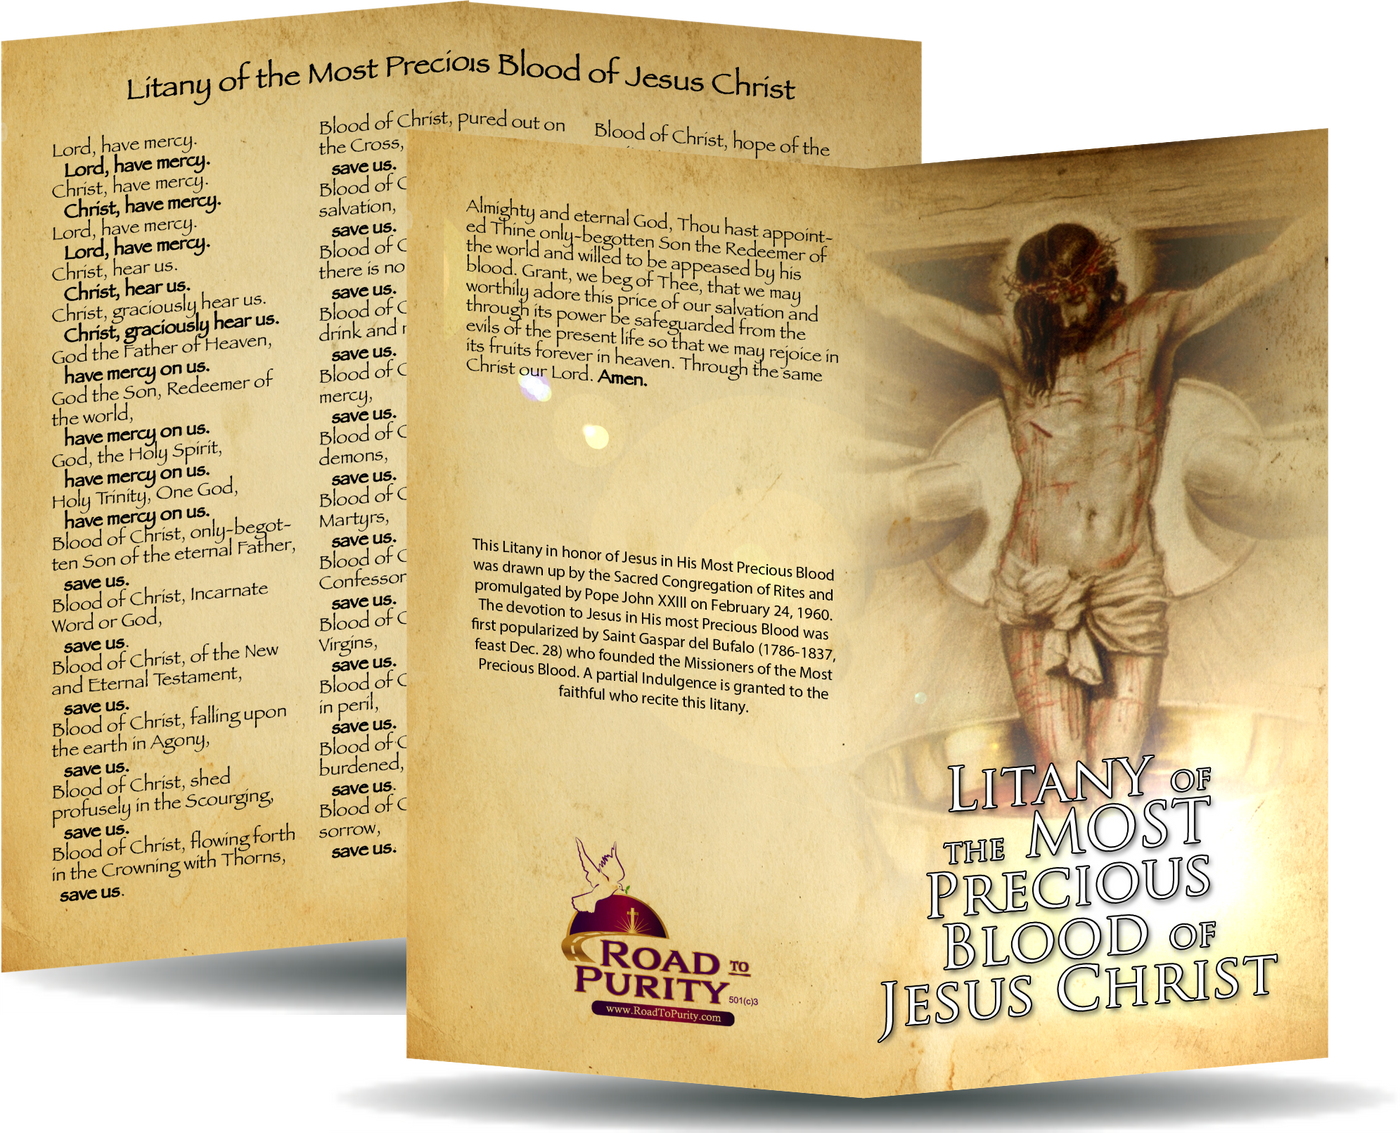 Litany of the Most Precious Blood of Jesus Christ